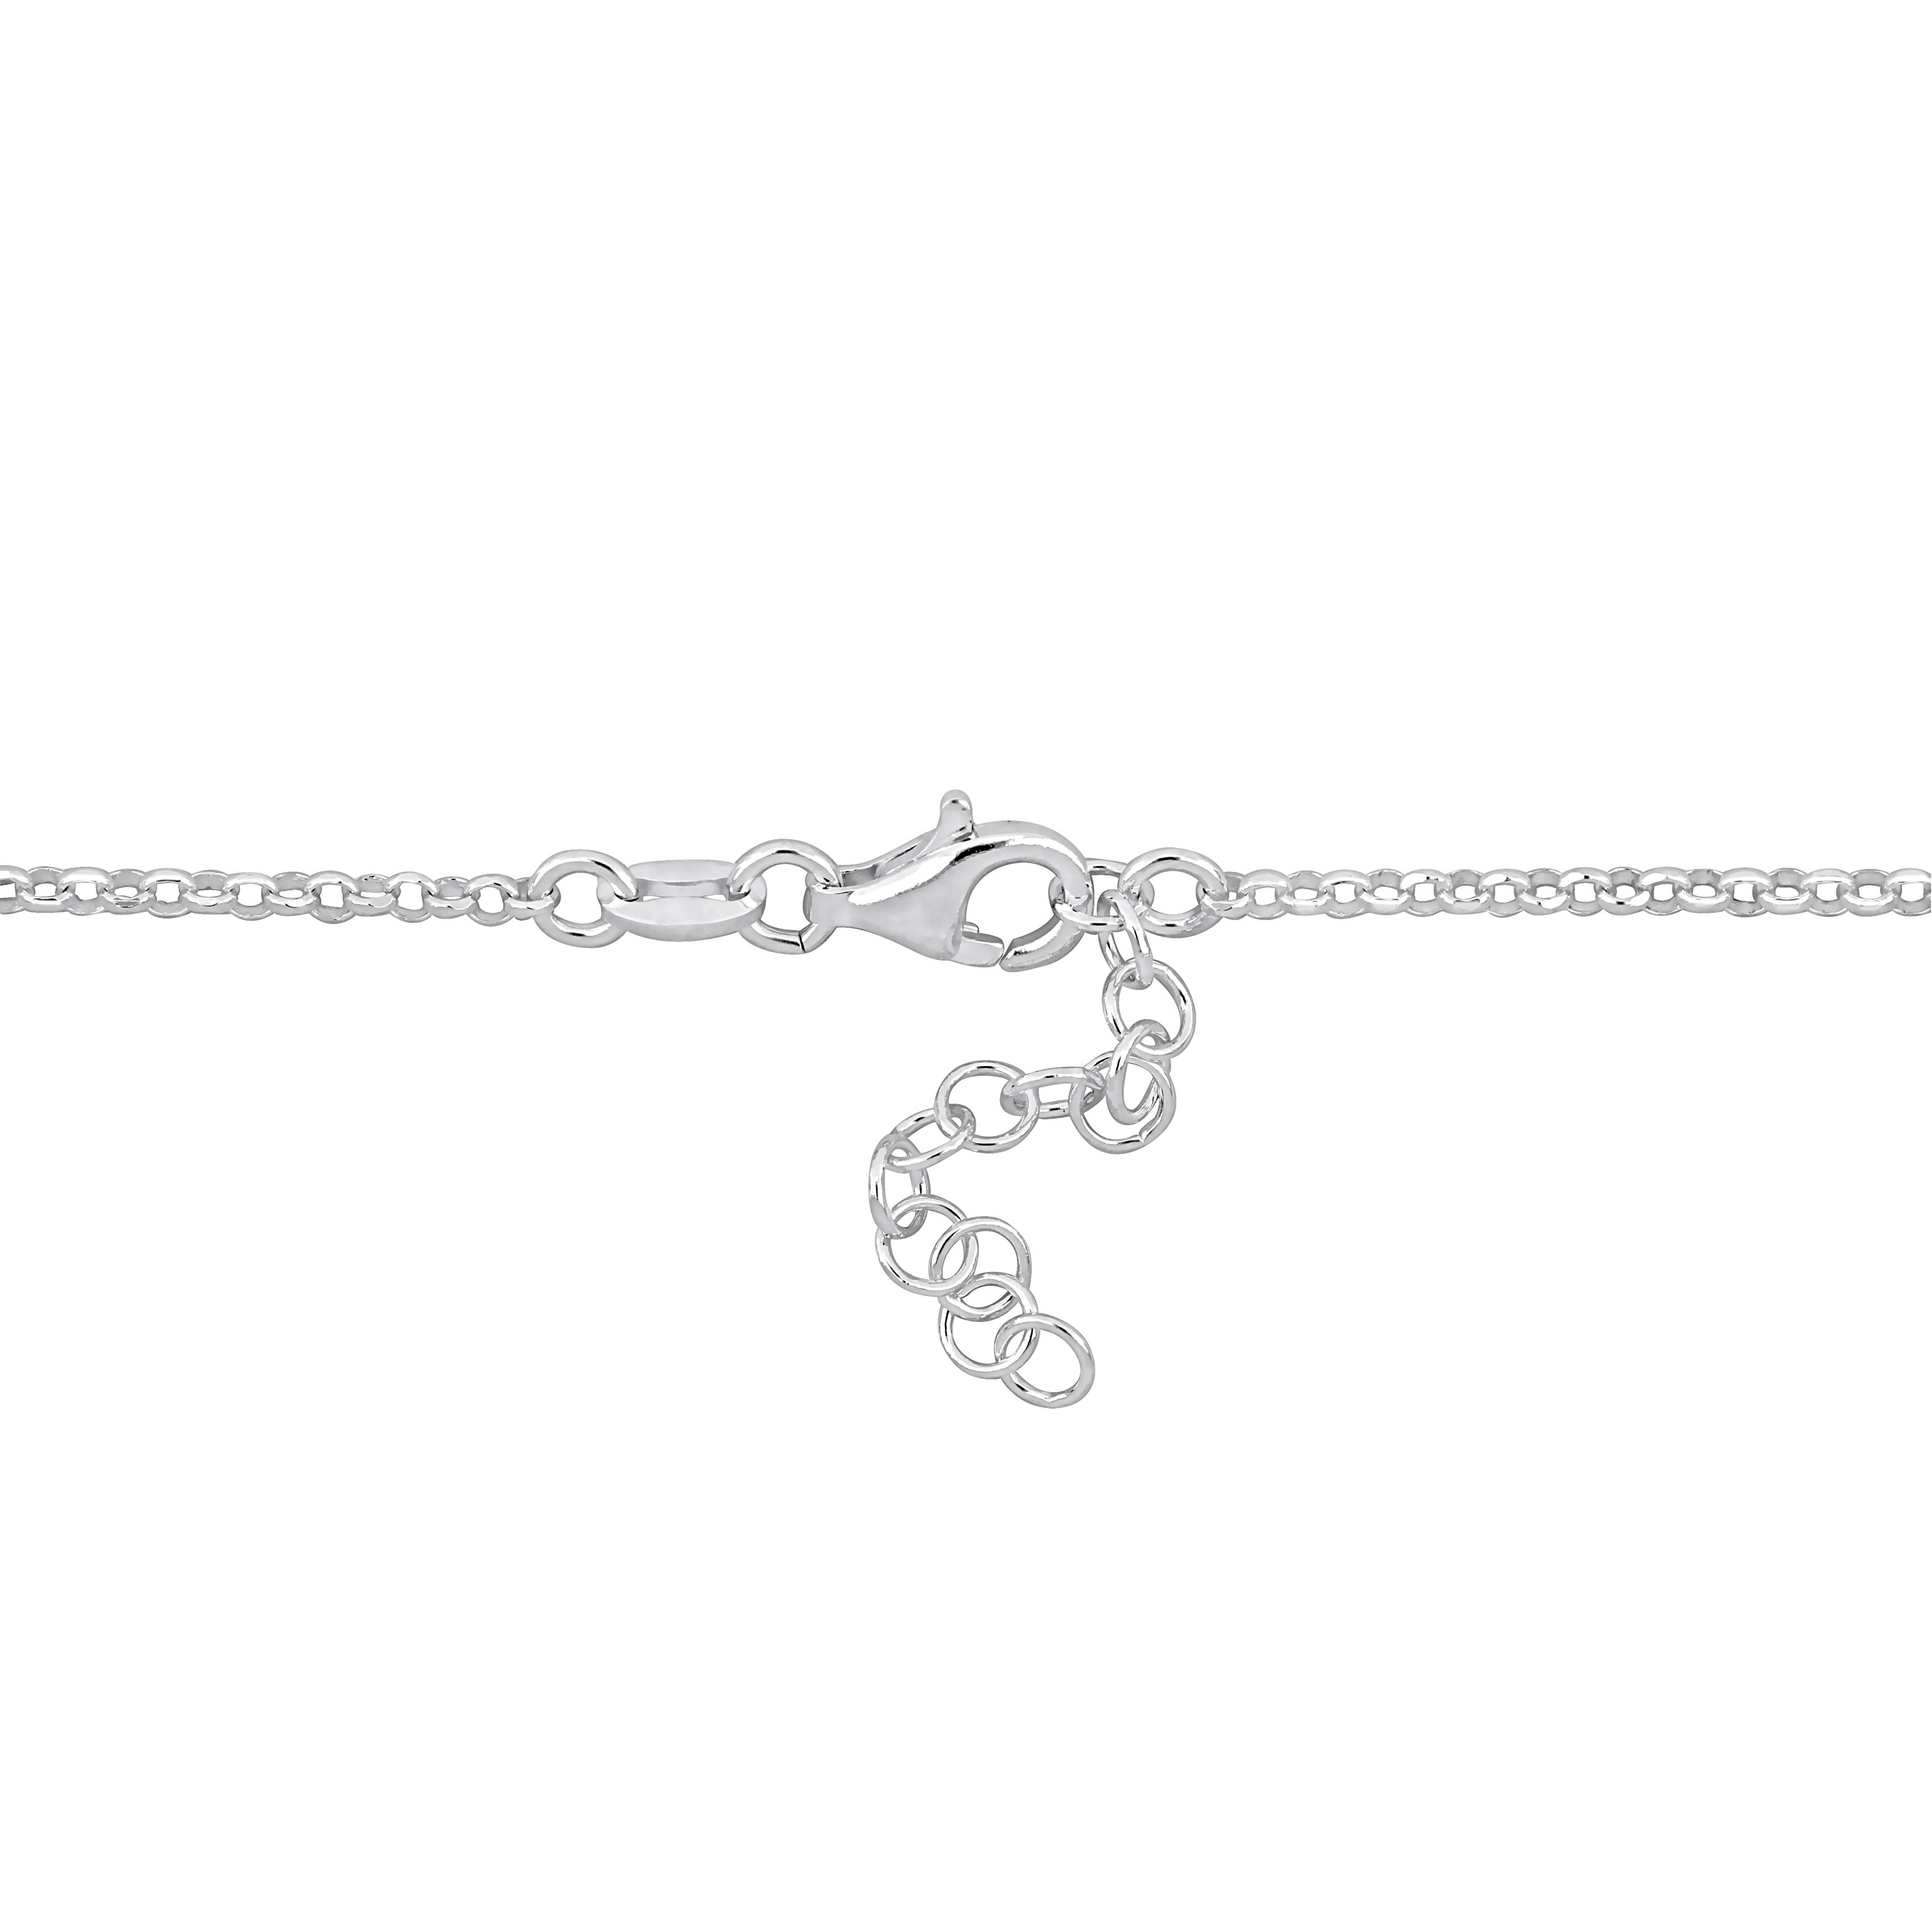 Four Yellow Heart Charm Station Bracelet on Rolo Chain in Two-Tone Sterling Silver- 7+1 in.